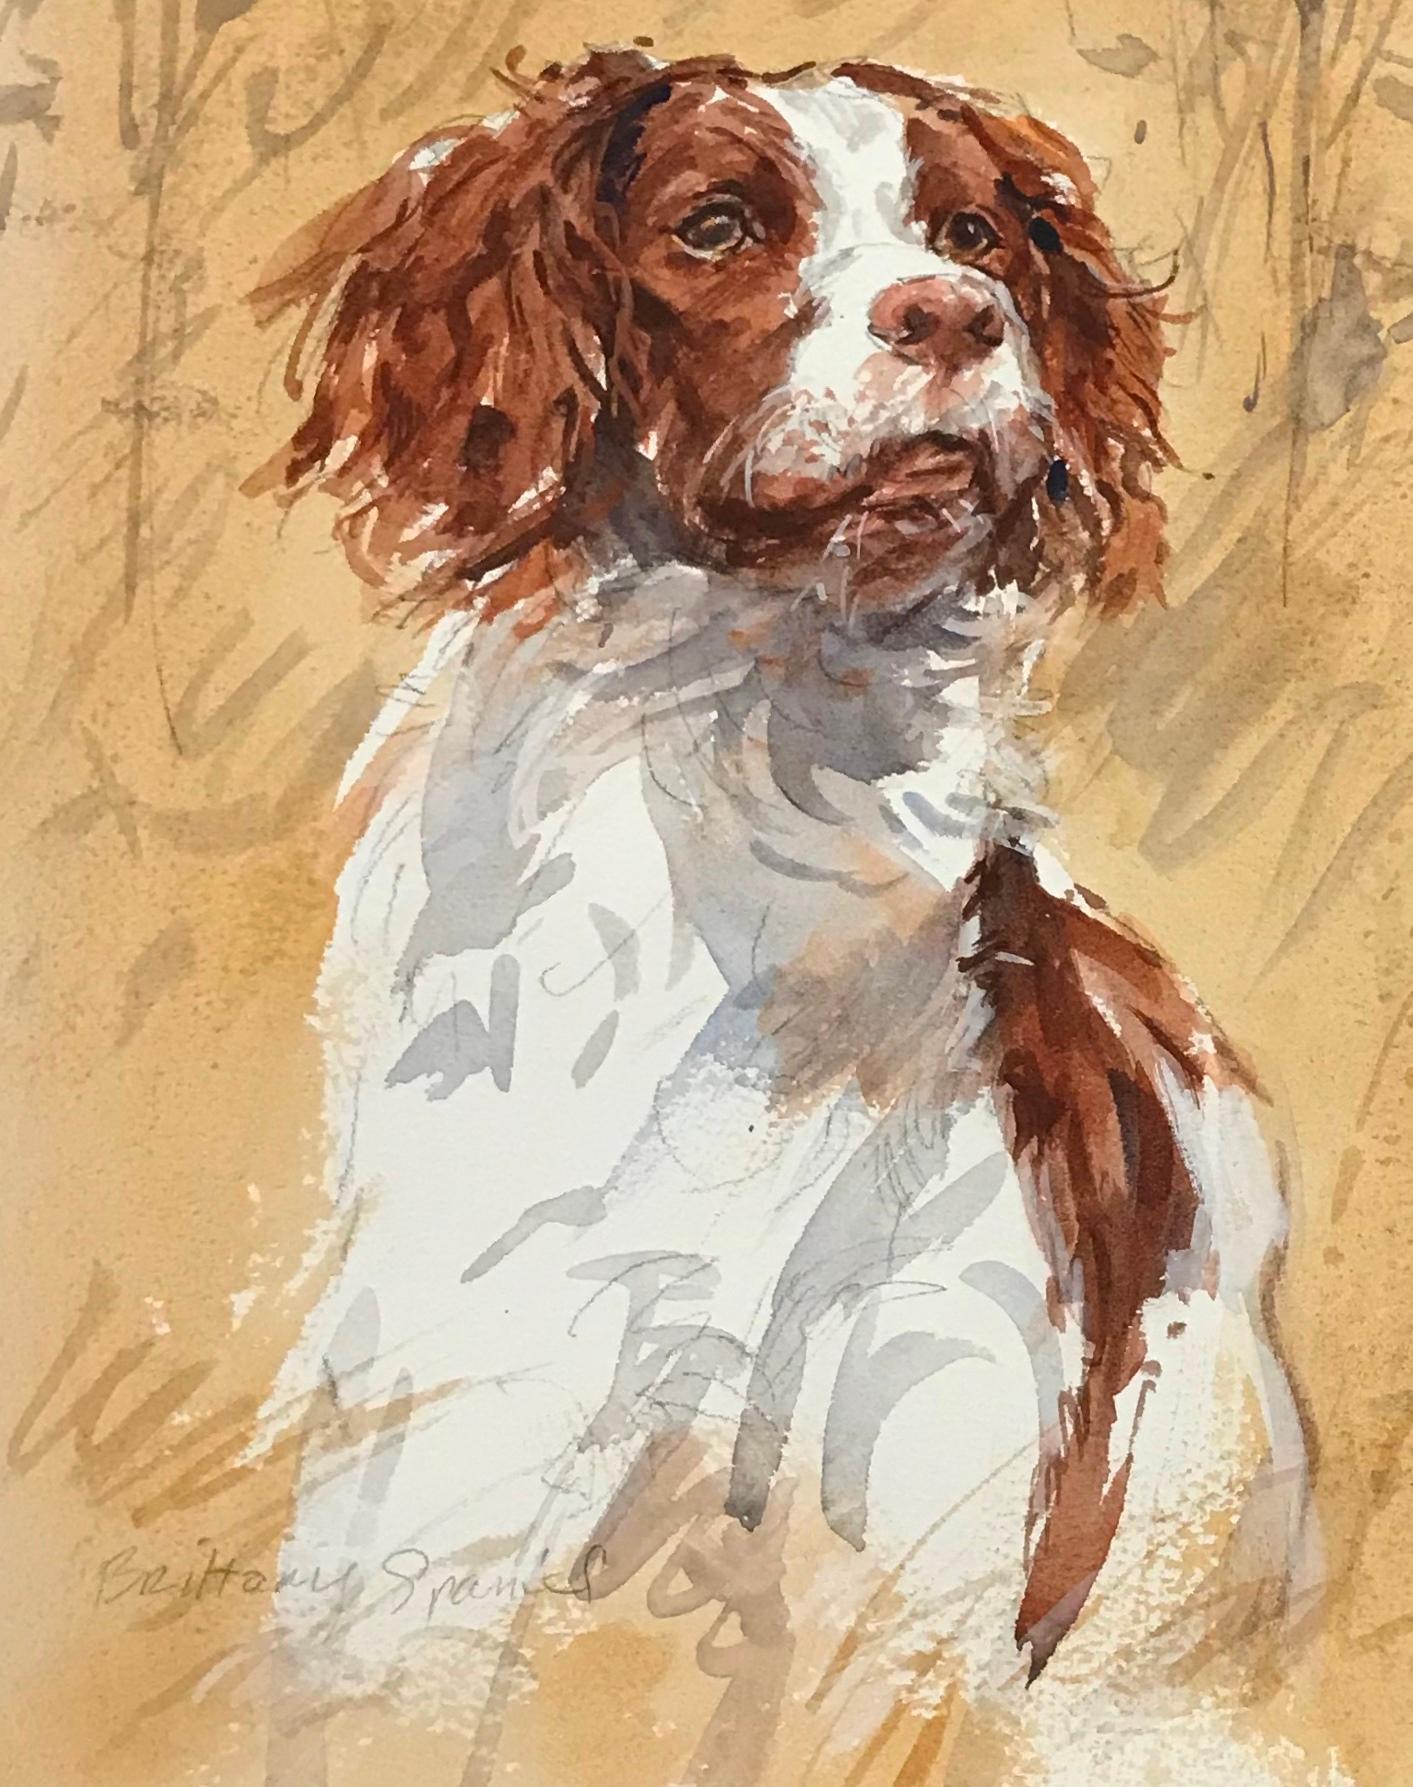 Contemporary Vignette of a Brittany Spaniel Pointing at Pheasants in Flight  - Painting by Sandra Oppegard